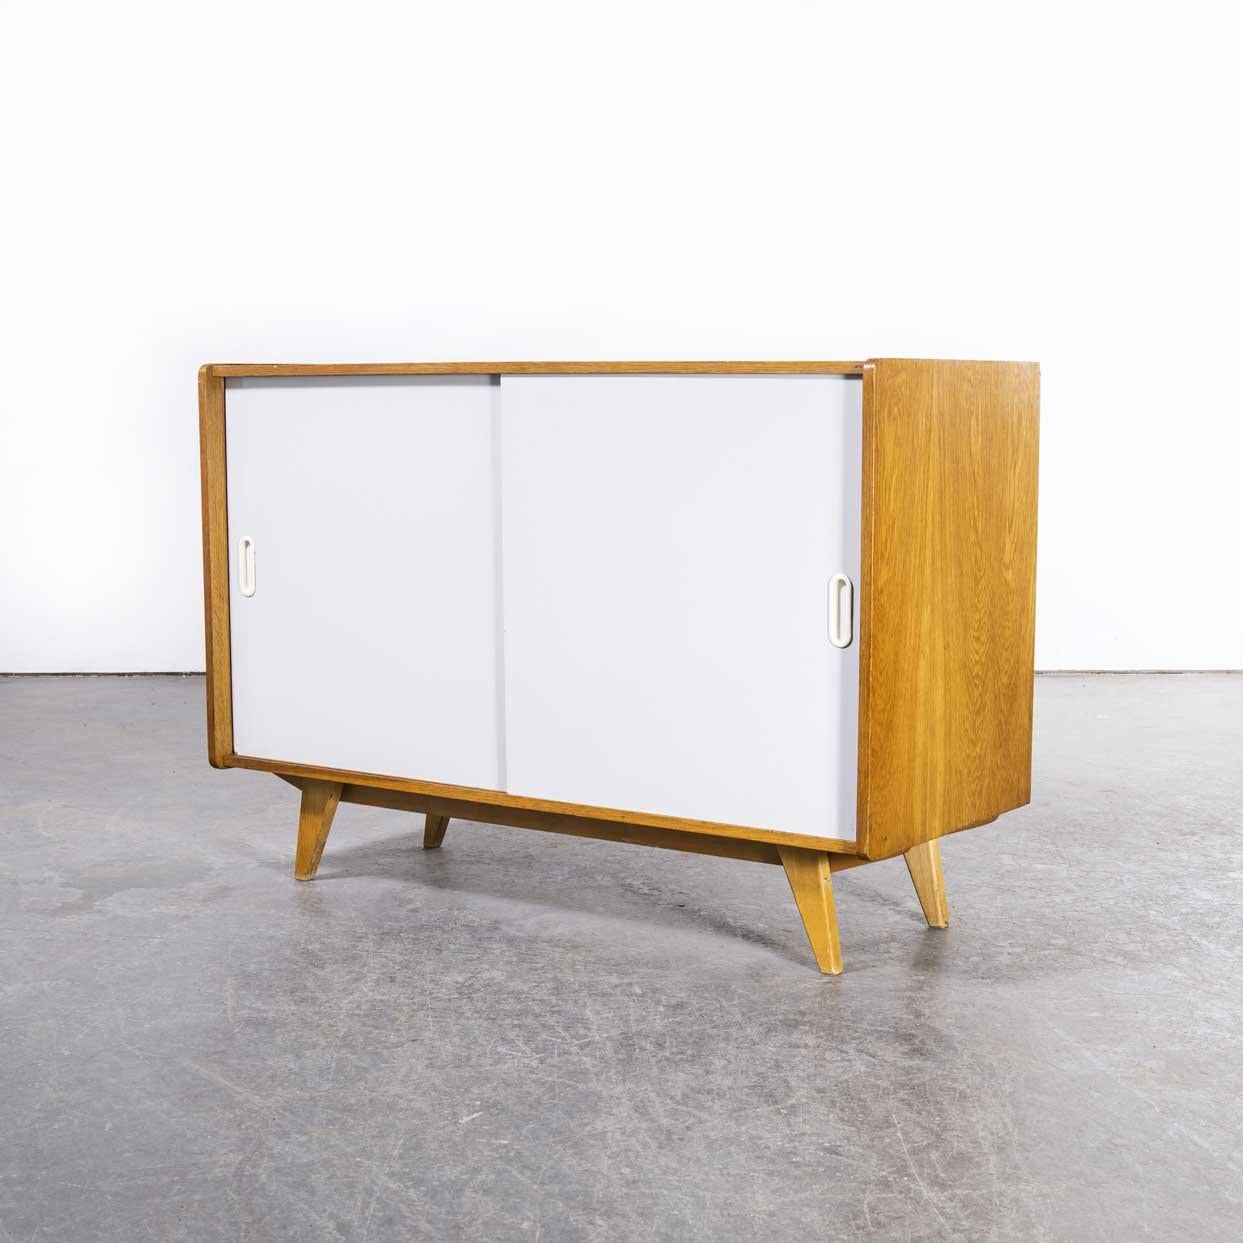 Model U-452 – 1950’s two door cabinet by Jiri Jiroutek for Interieur Praha
Model U-452 – 1950’s two door cabinet by Jiri Jiroutek for Interieur Praha. These cabinets by Praha are increasingly popular due to their practical size and this piece is a